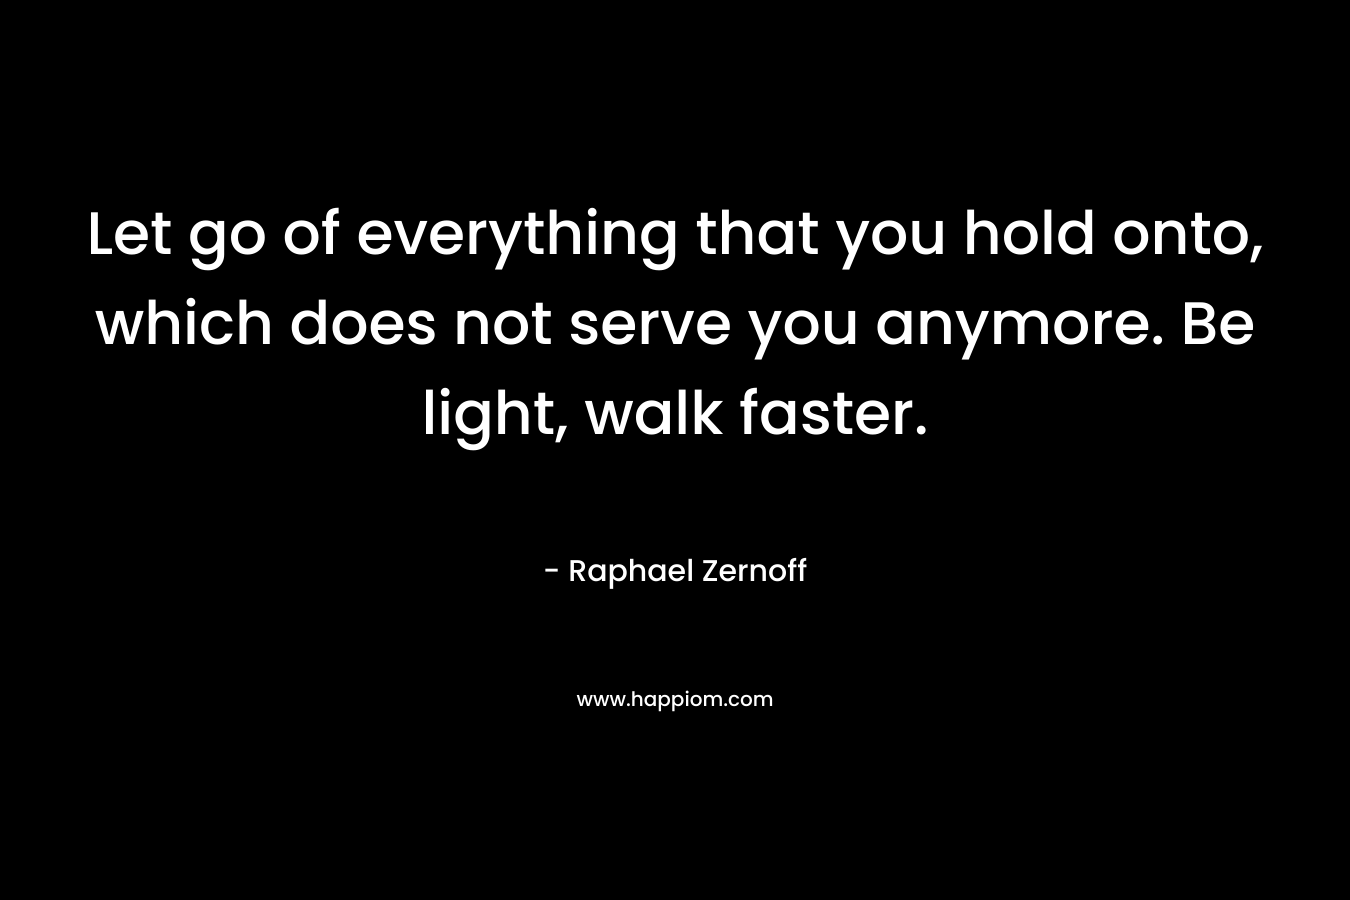 Let go of everything that you hold onto, which does not serve you anymore. Be light, walk faster.